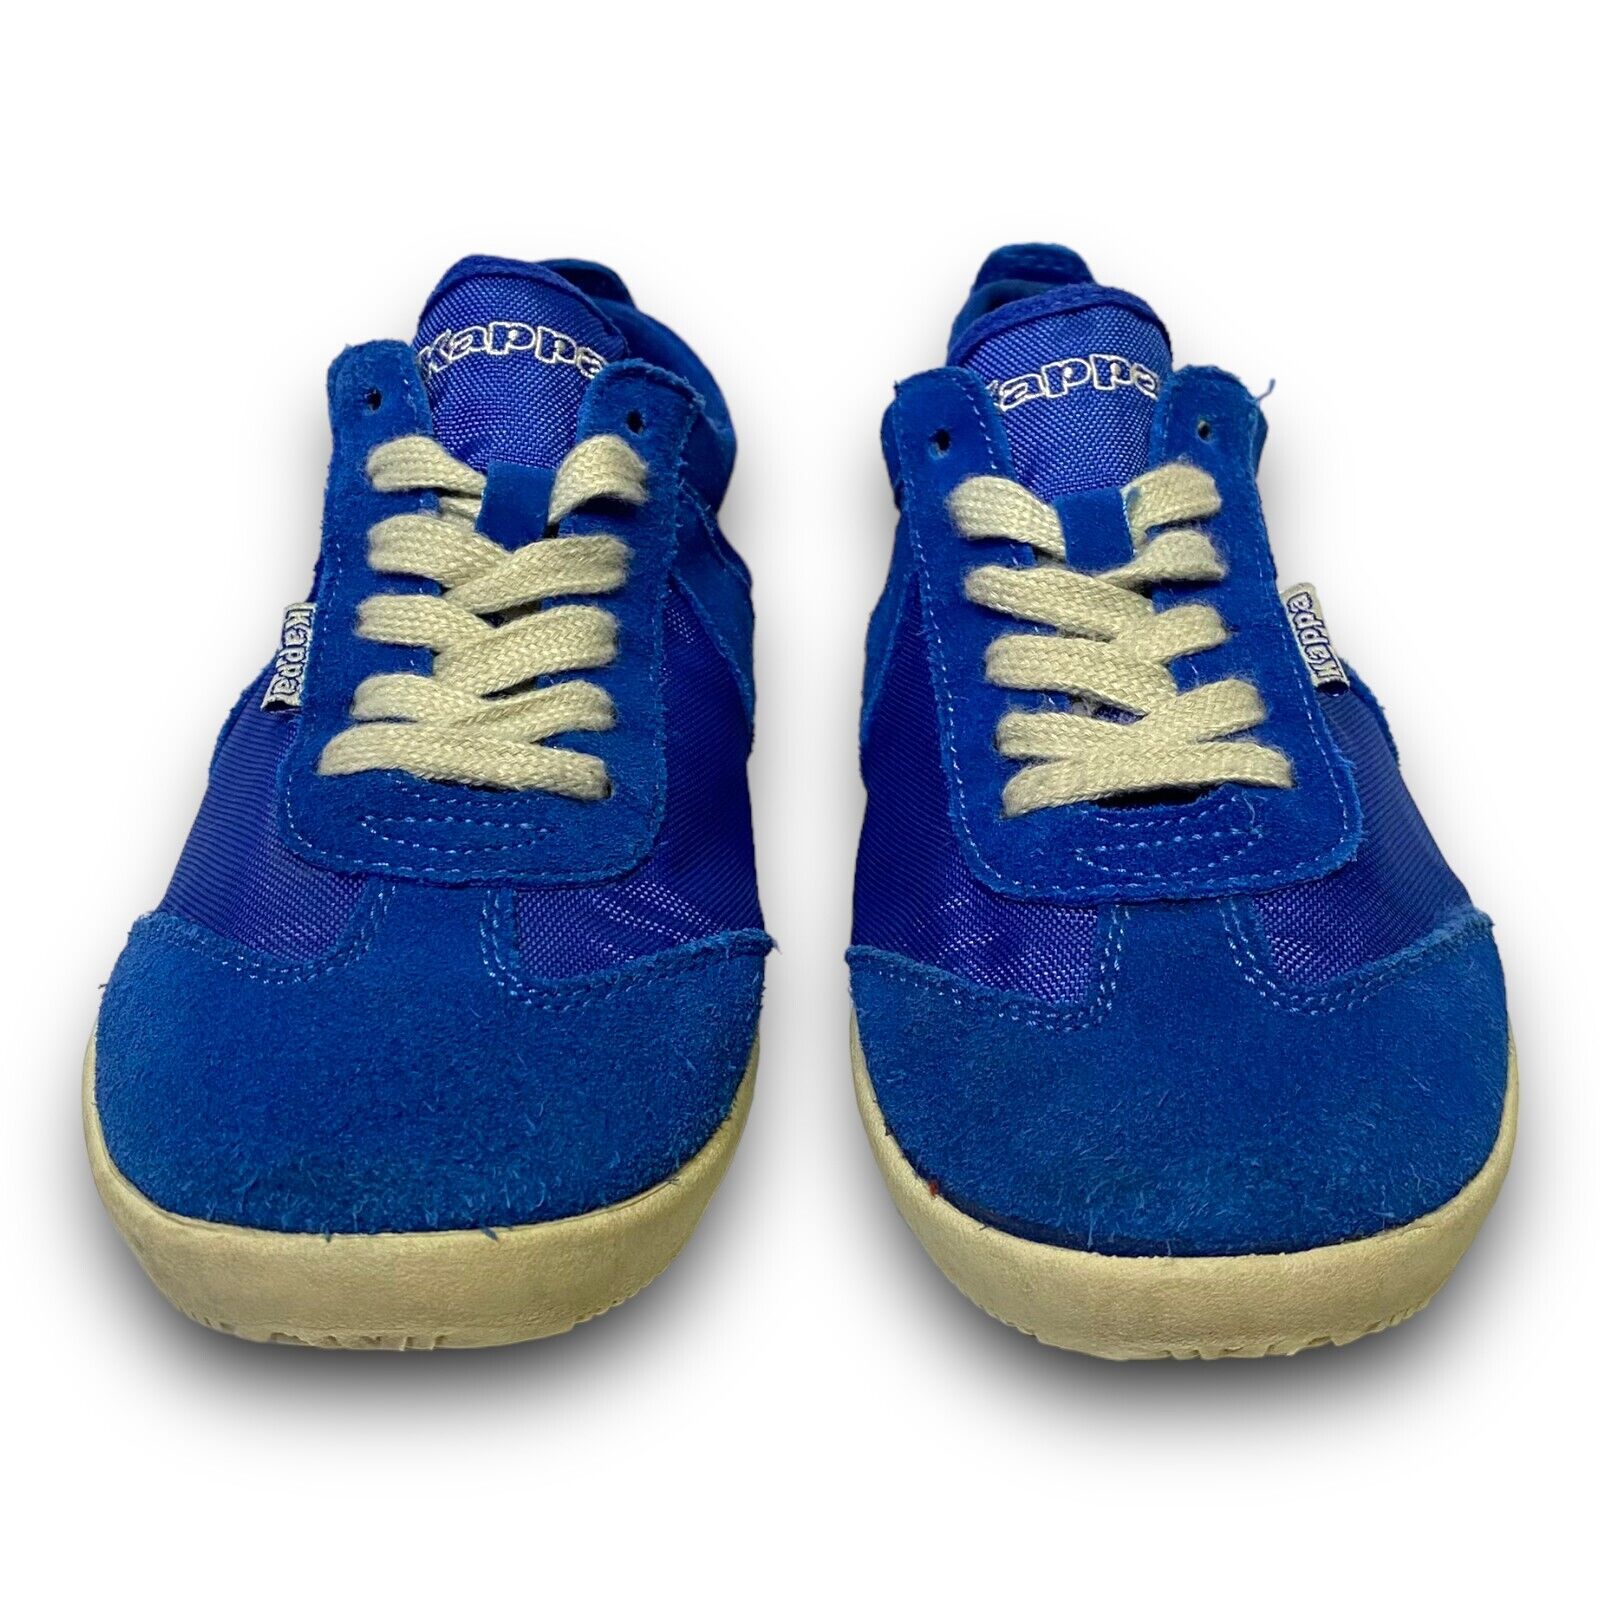 Kappa Mens Vintage 90s Shoes Up | Logo Lace eBay US Size Rare 7 Suede Sneakers Blue